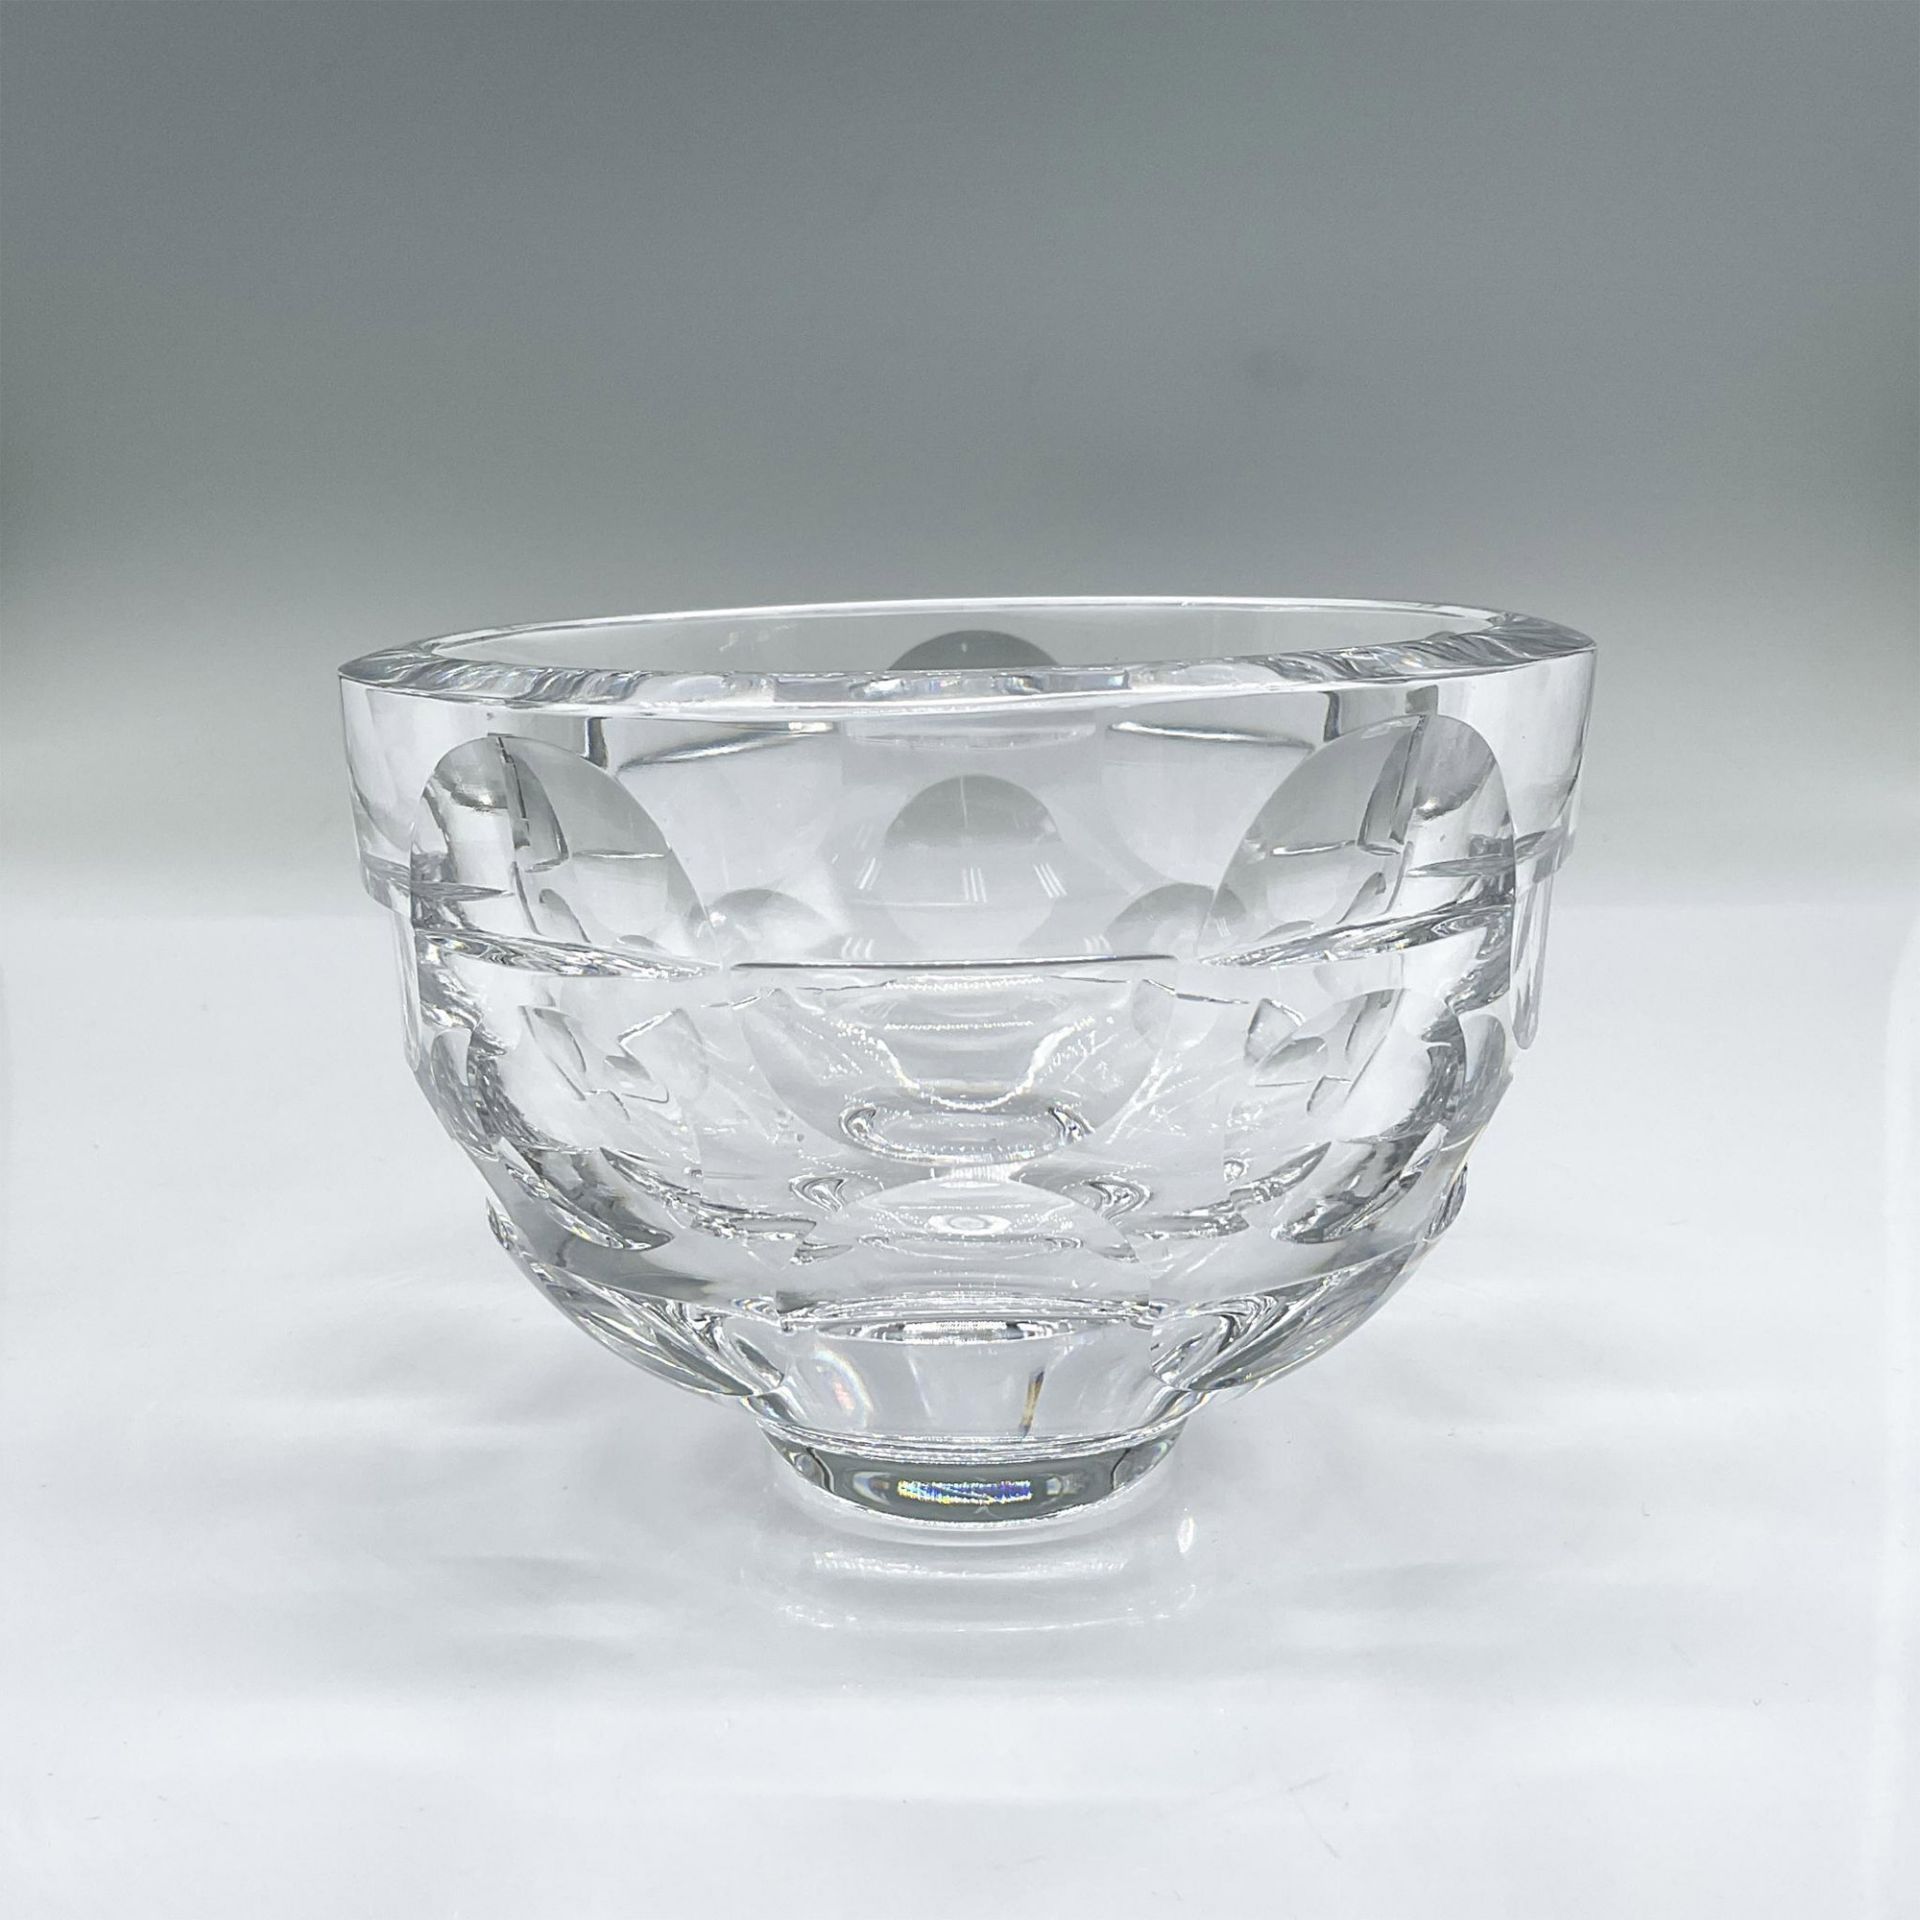 Orrefors Crystal Bowl, Swirl and Dots